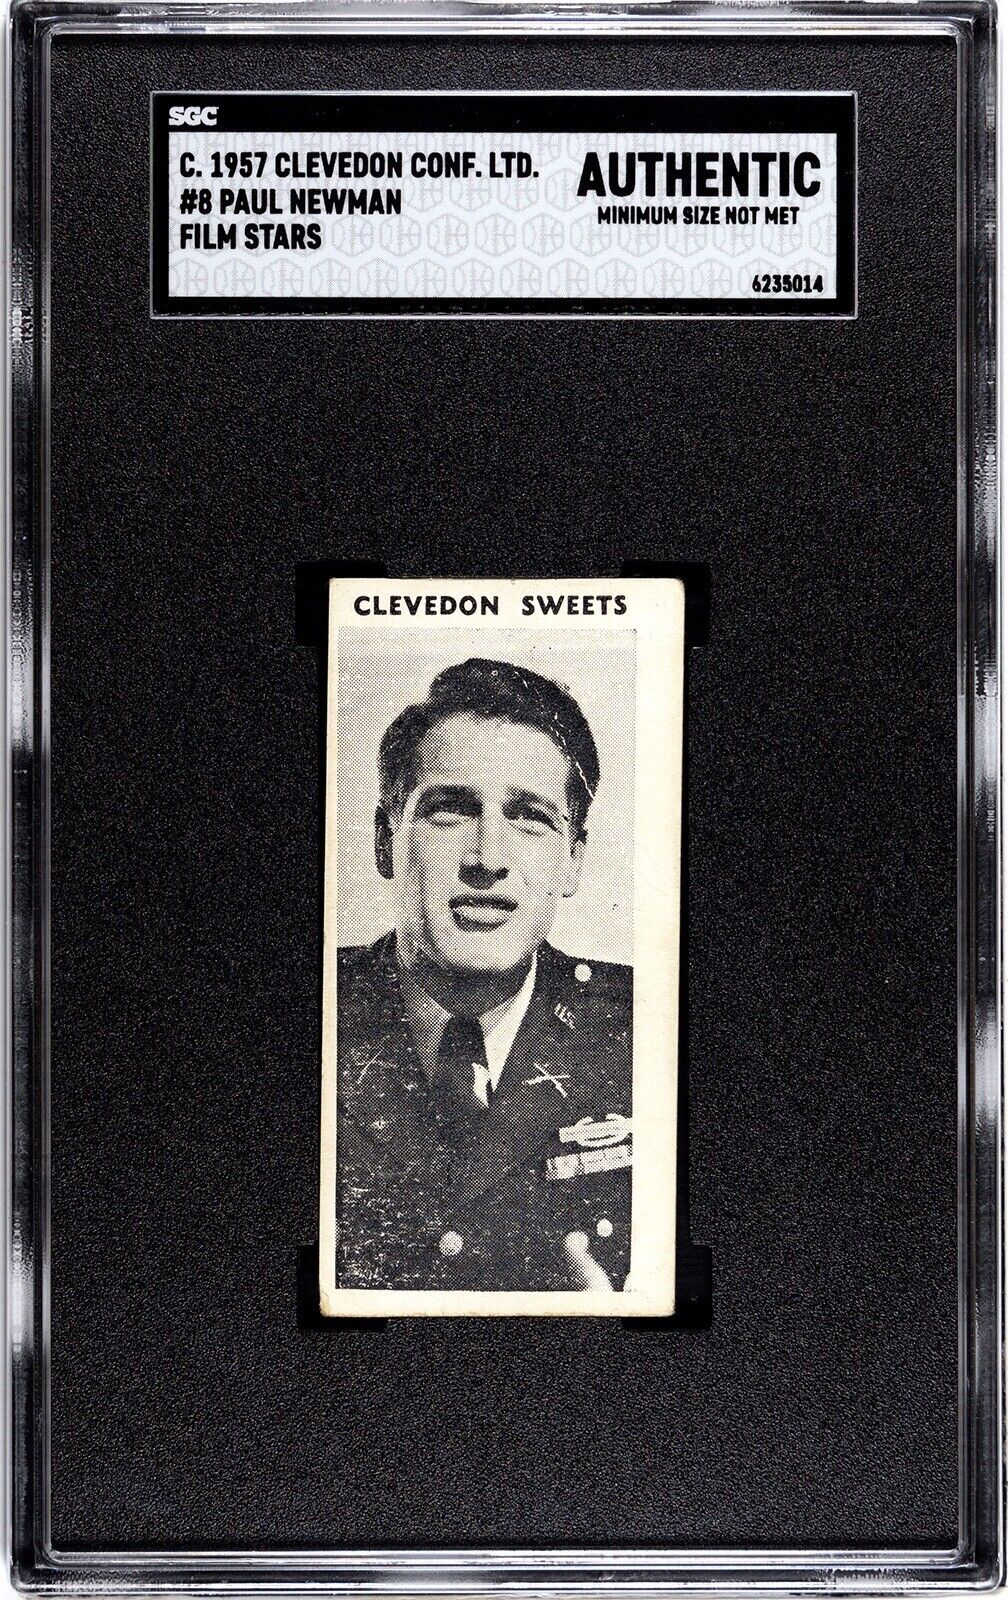 C. 1957 Clevedon Sweets PAUL NEWMAN Film Stars #8 Confectionery SGC AUTHENTIC